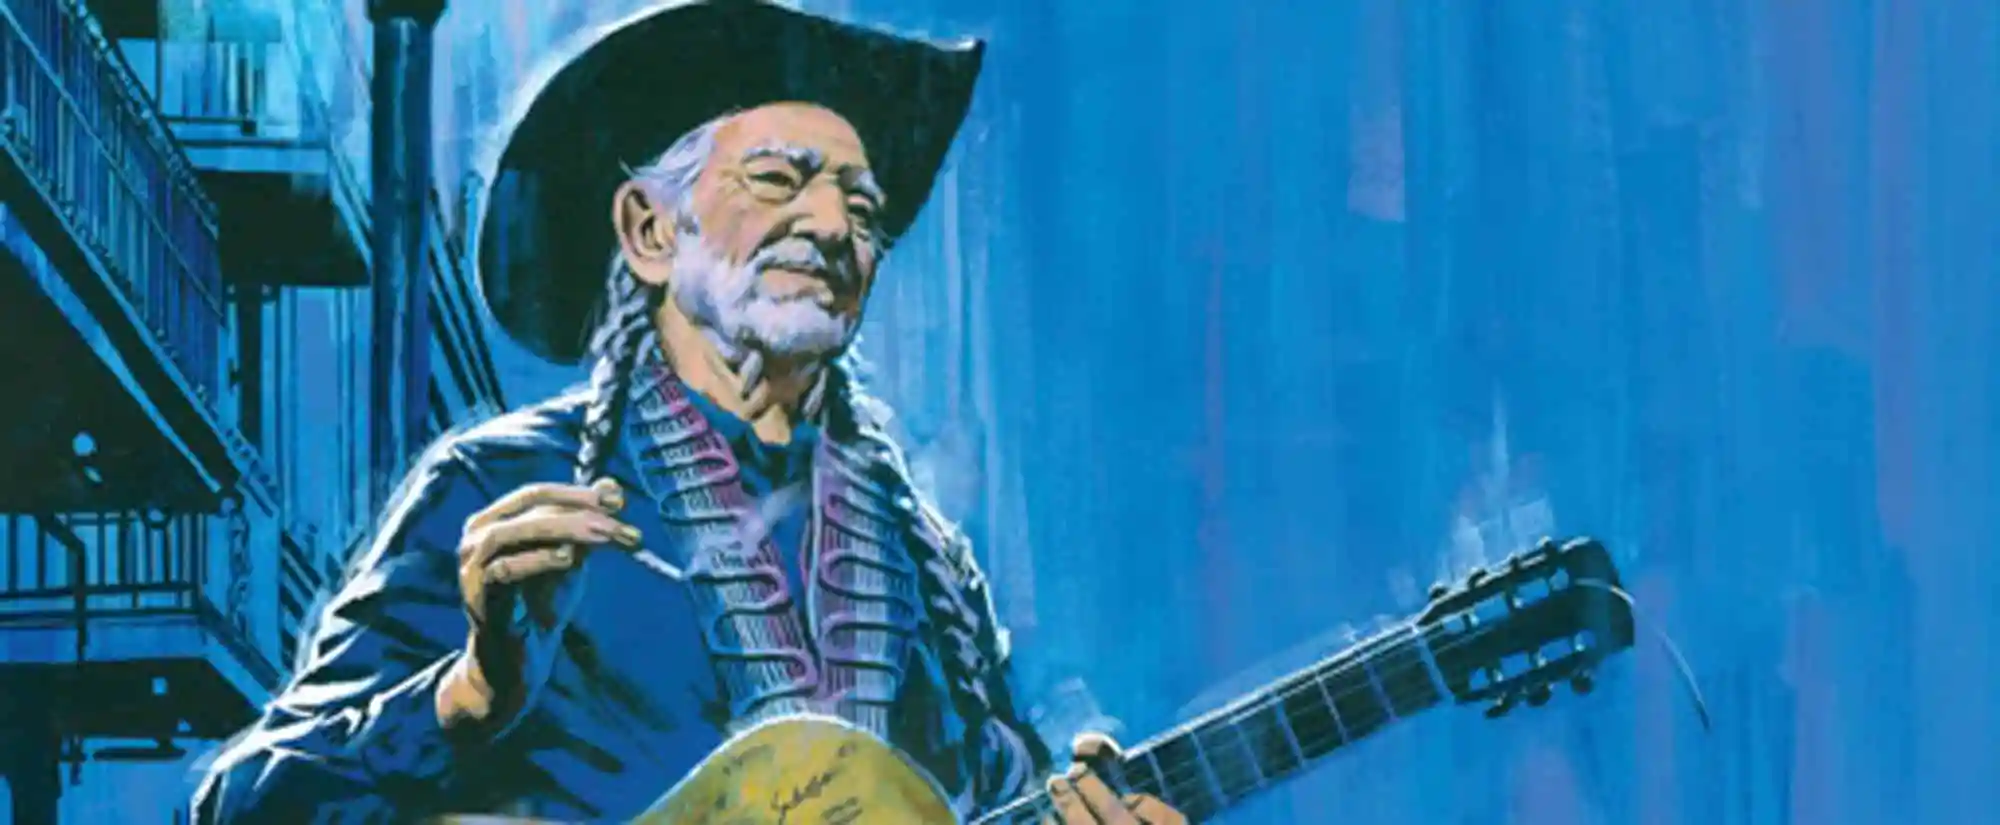 A Classic Sings A Classic: Watch Willie Nelson’s Lyric Video For “That’s Life”